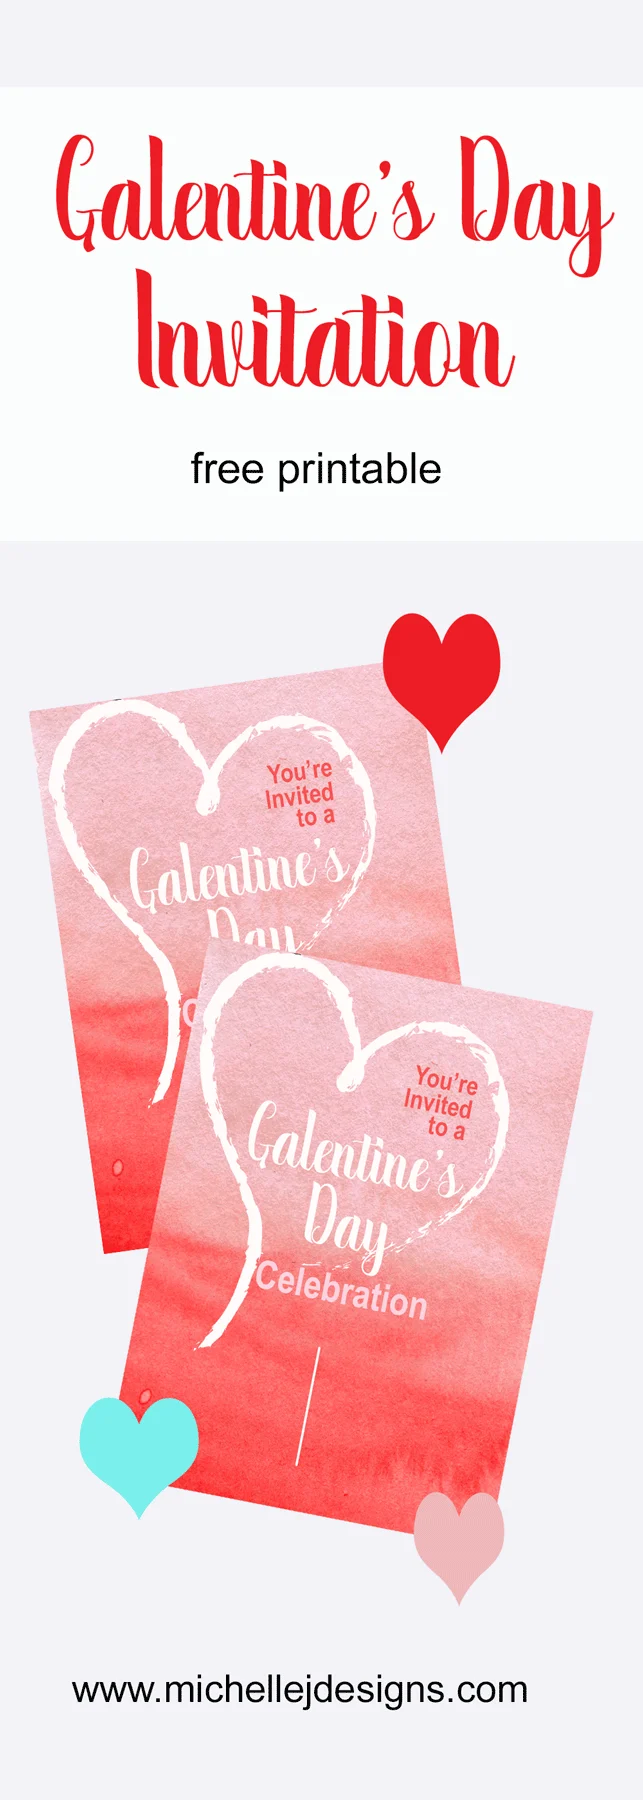 Galentine's Day Celebration Invitation ready to download and add text